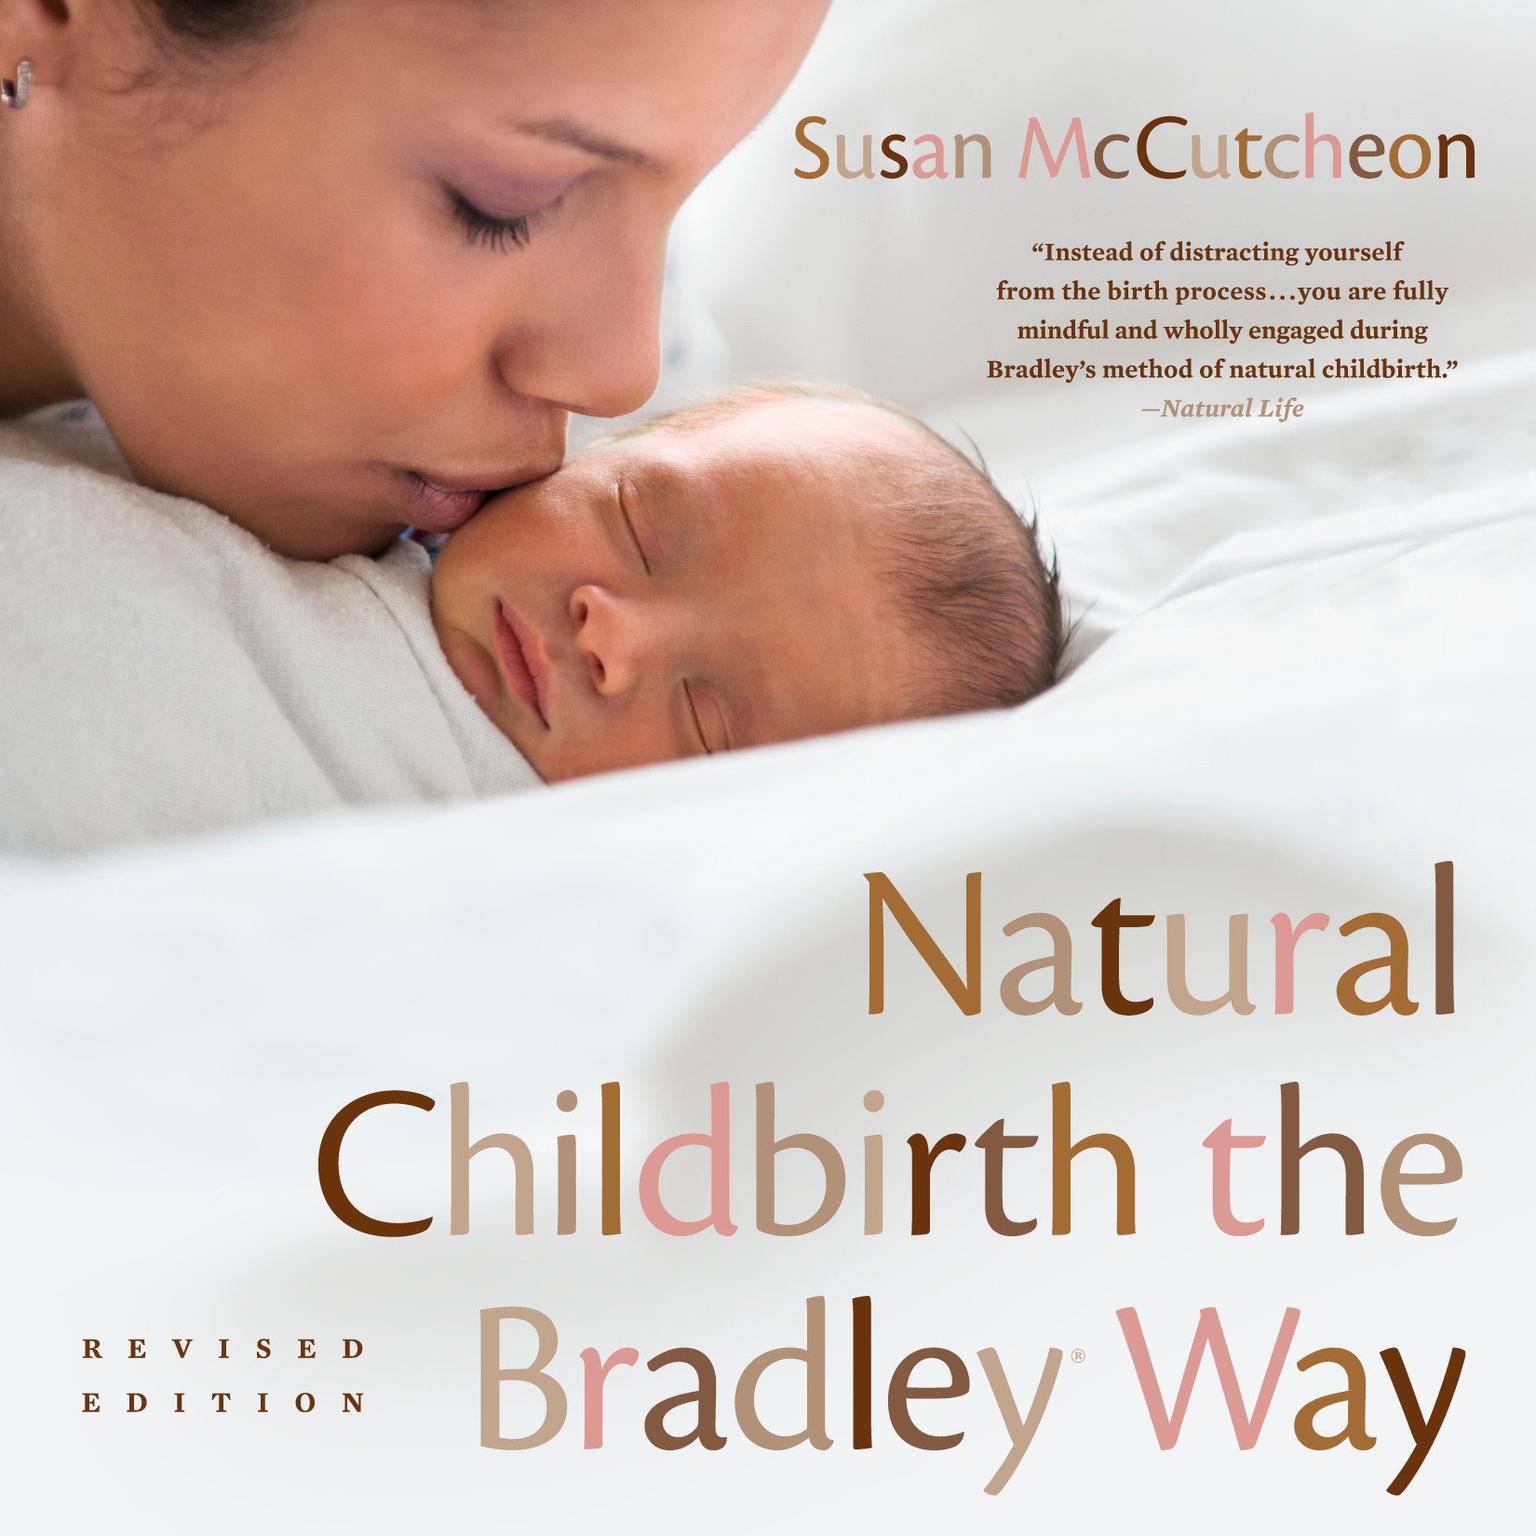 Natural Childbirth the Bradley Way: Revised Edition Audiobook, by Susan McCutcheon